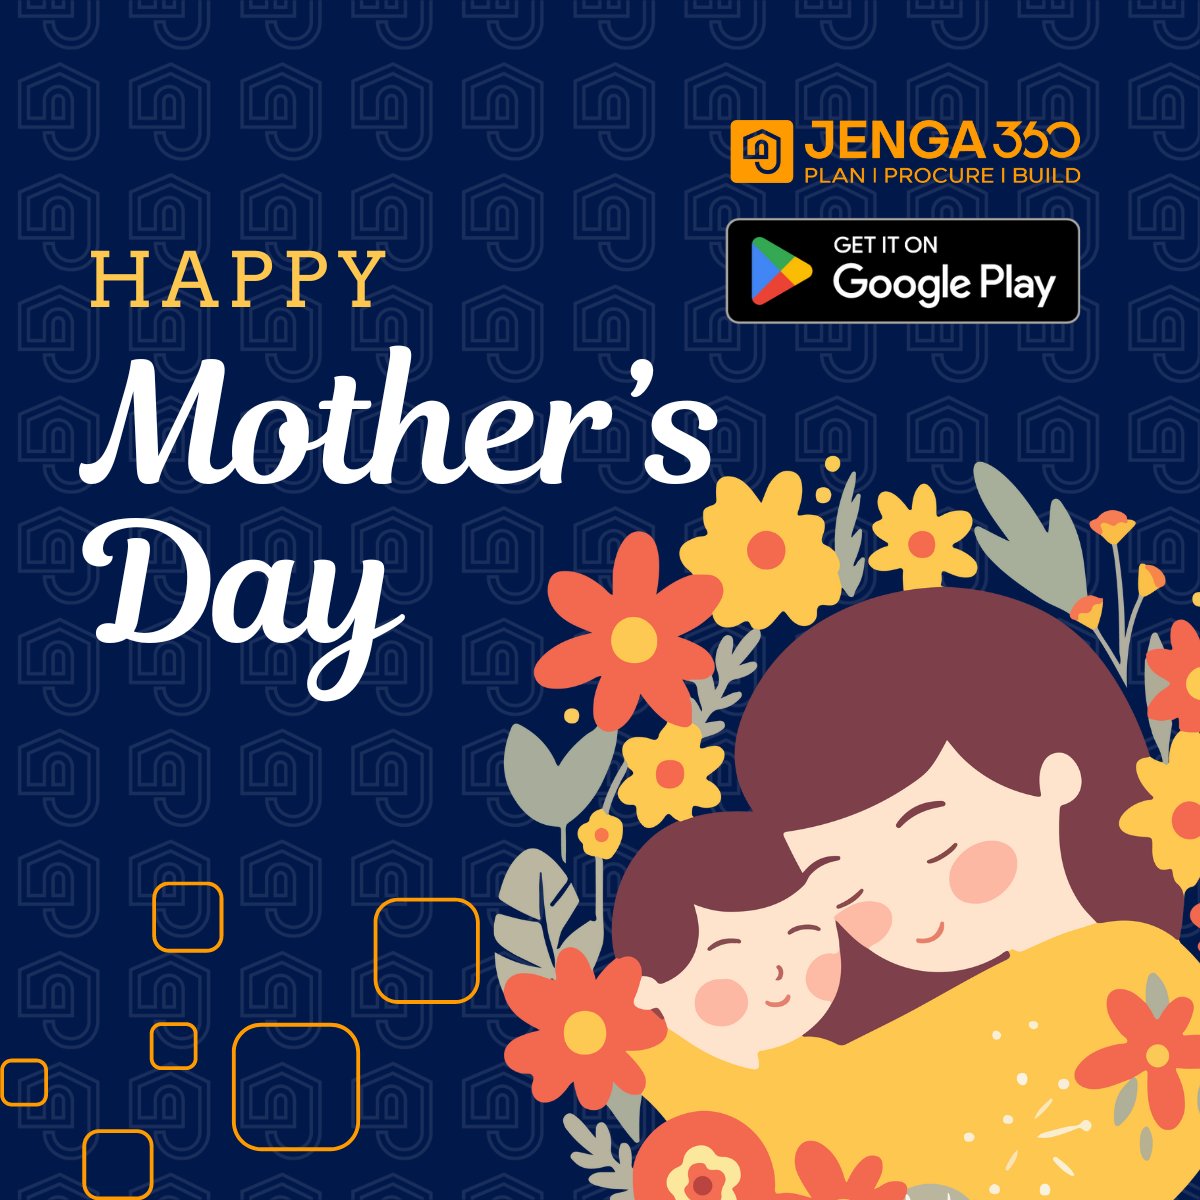 Happy Mother's Day to all the incredible Moms out there!
Your strength, love and nurturing spirit are the foundation of every home.
Today, we celebrate you and all that you do.
#HappyMothersDay #momslife #moms #momboss #momslove #Building #families